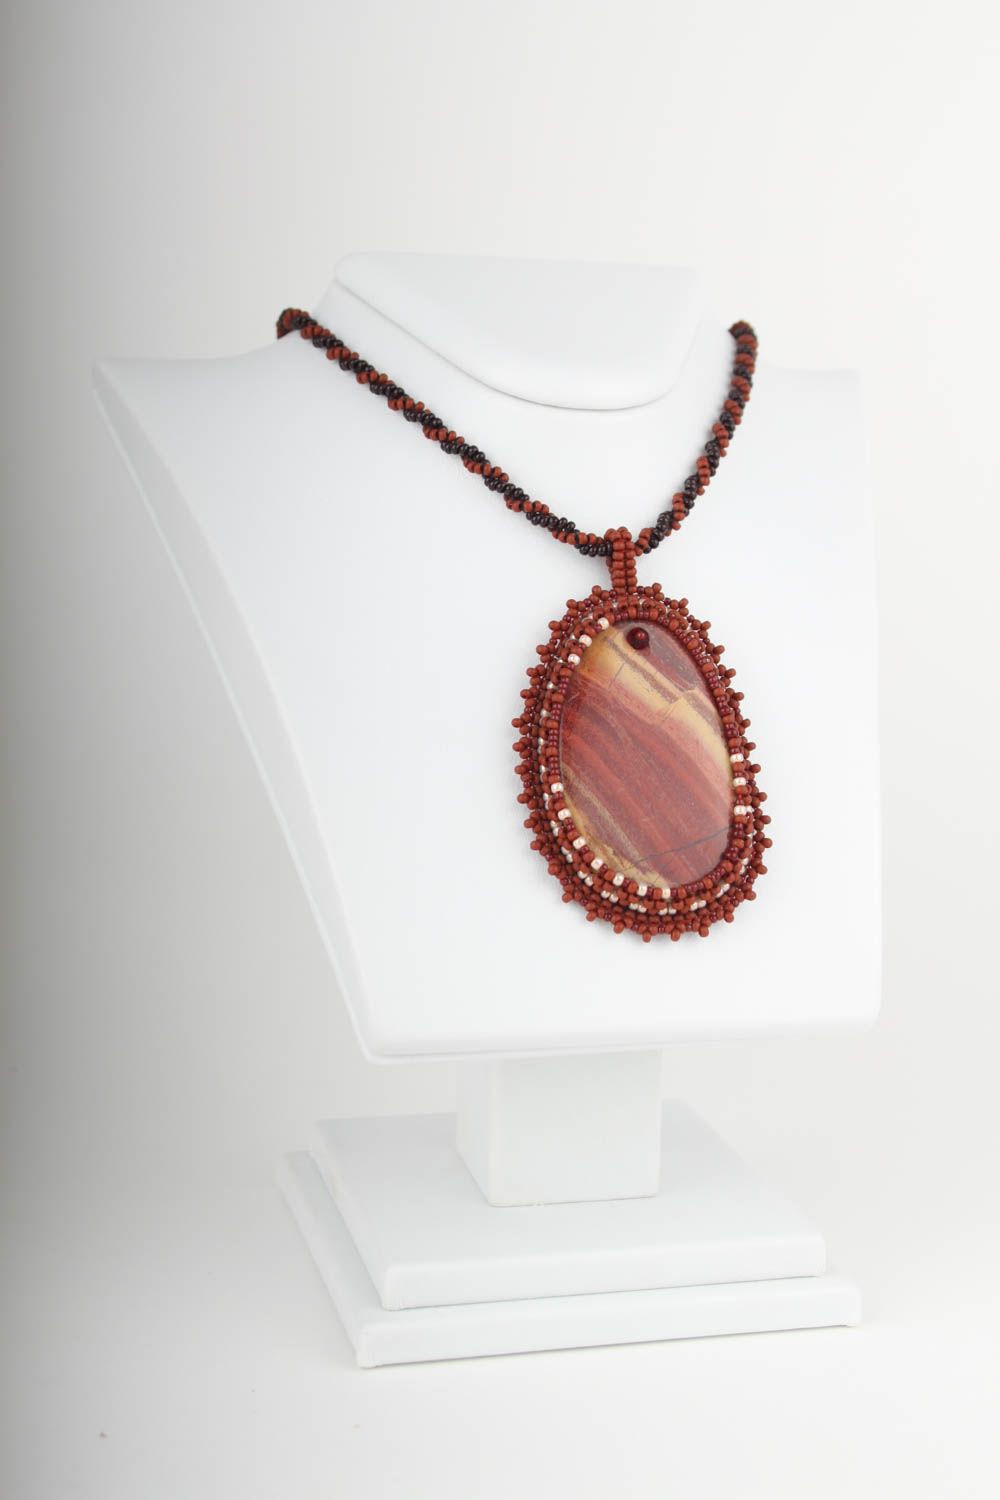 Handmade beaded pendant with natural stone stylish accessories trend bijouterie photo 1